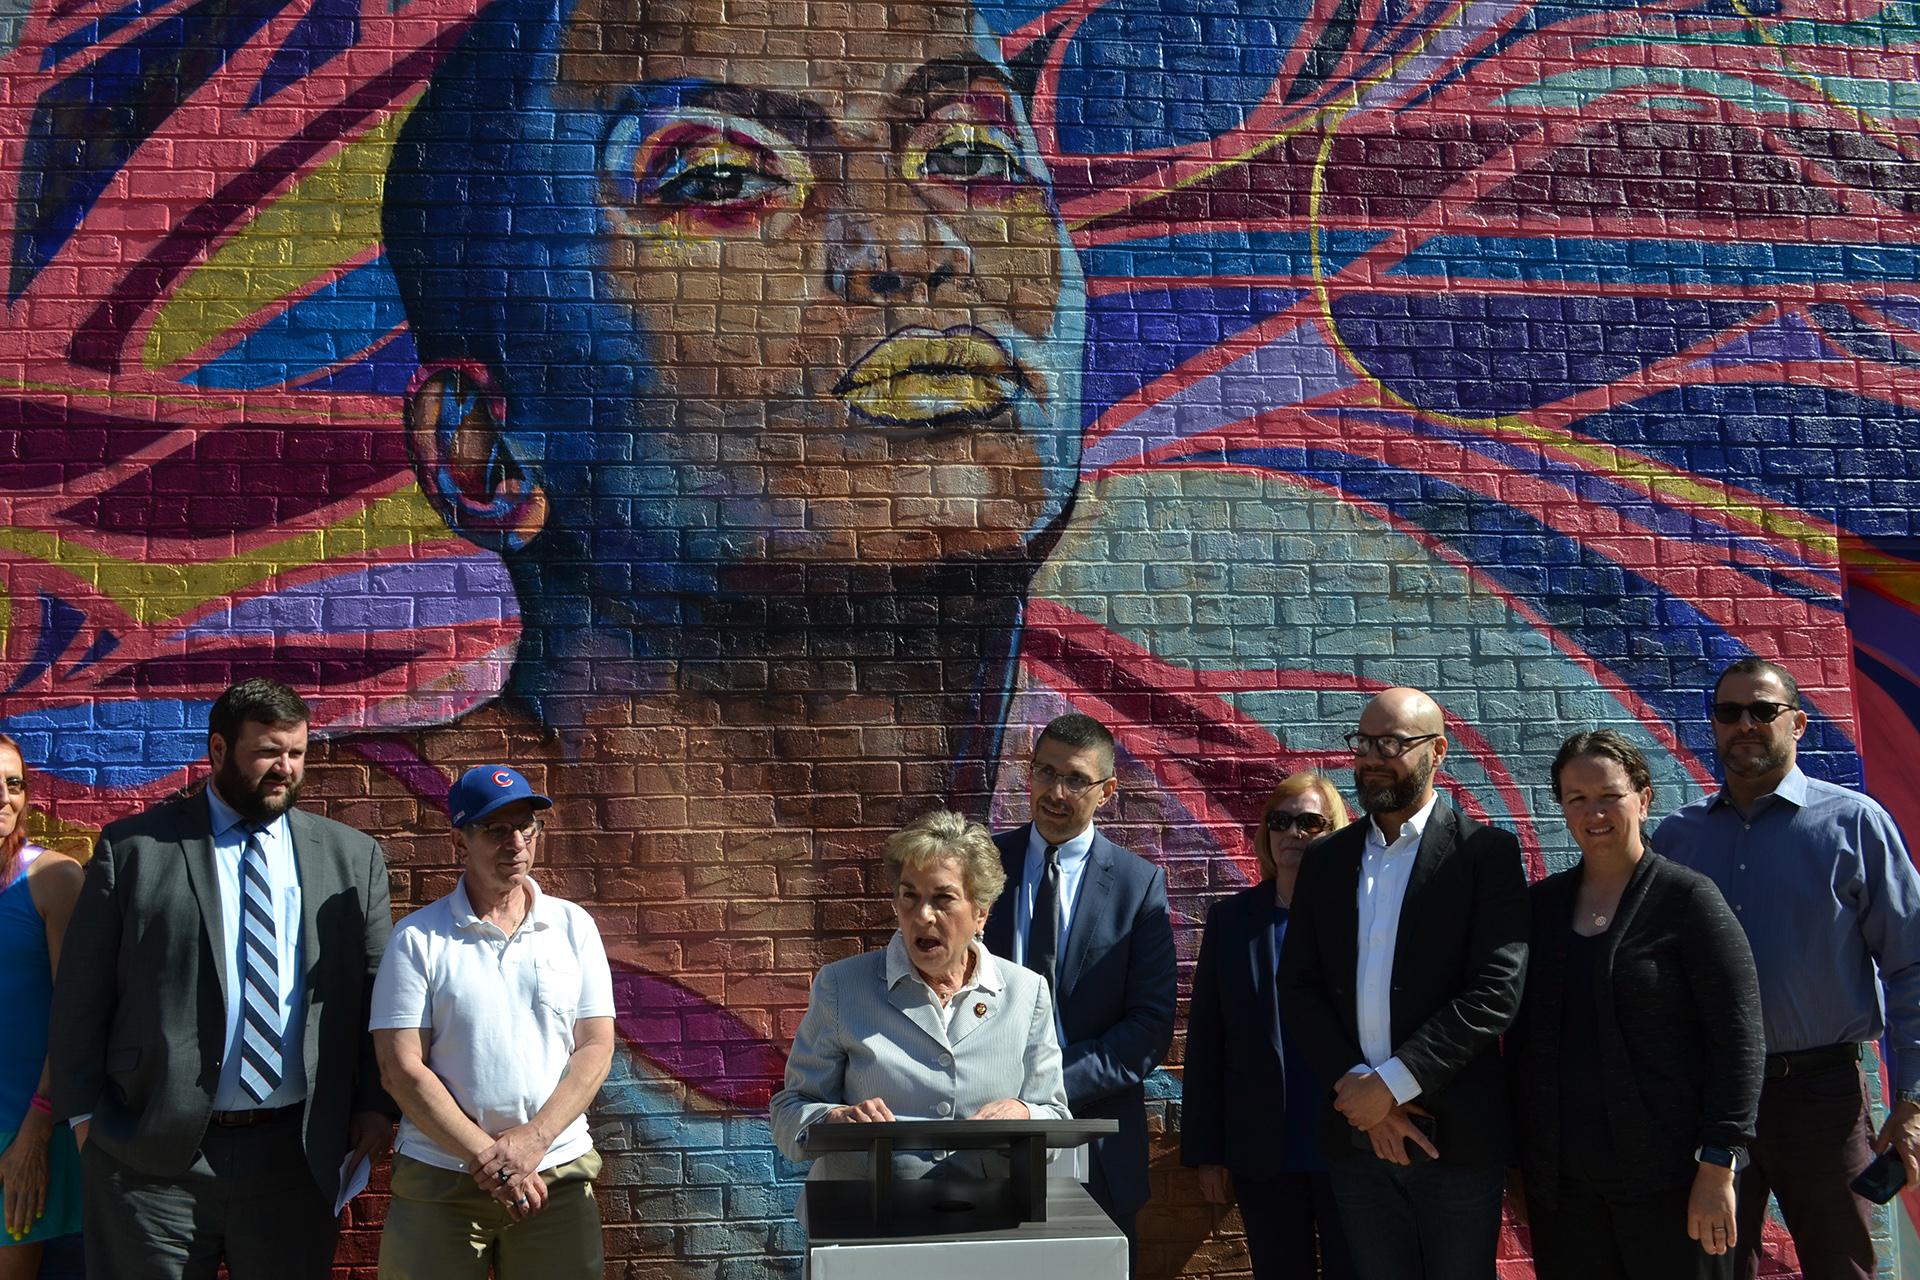 U.S. Rep. Jan Schakowsky (D-IL, 9th District) speaks outside the Howard Brown Health Center Friday, June 14 about how the Trump administration’s policies are limiting LGBTQ individuals’ access to health care. (Kristen Thometz / WTTW News)